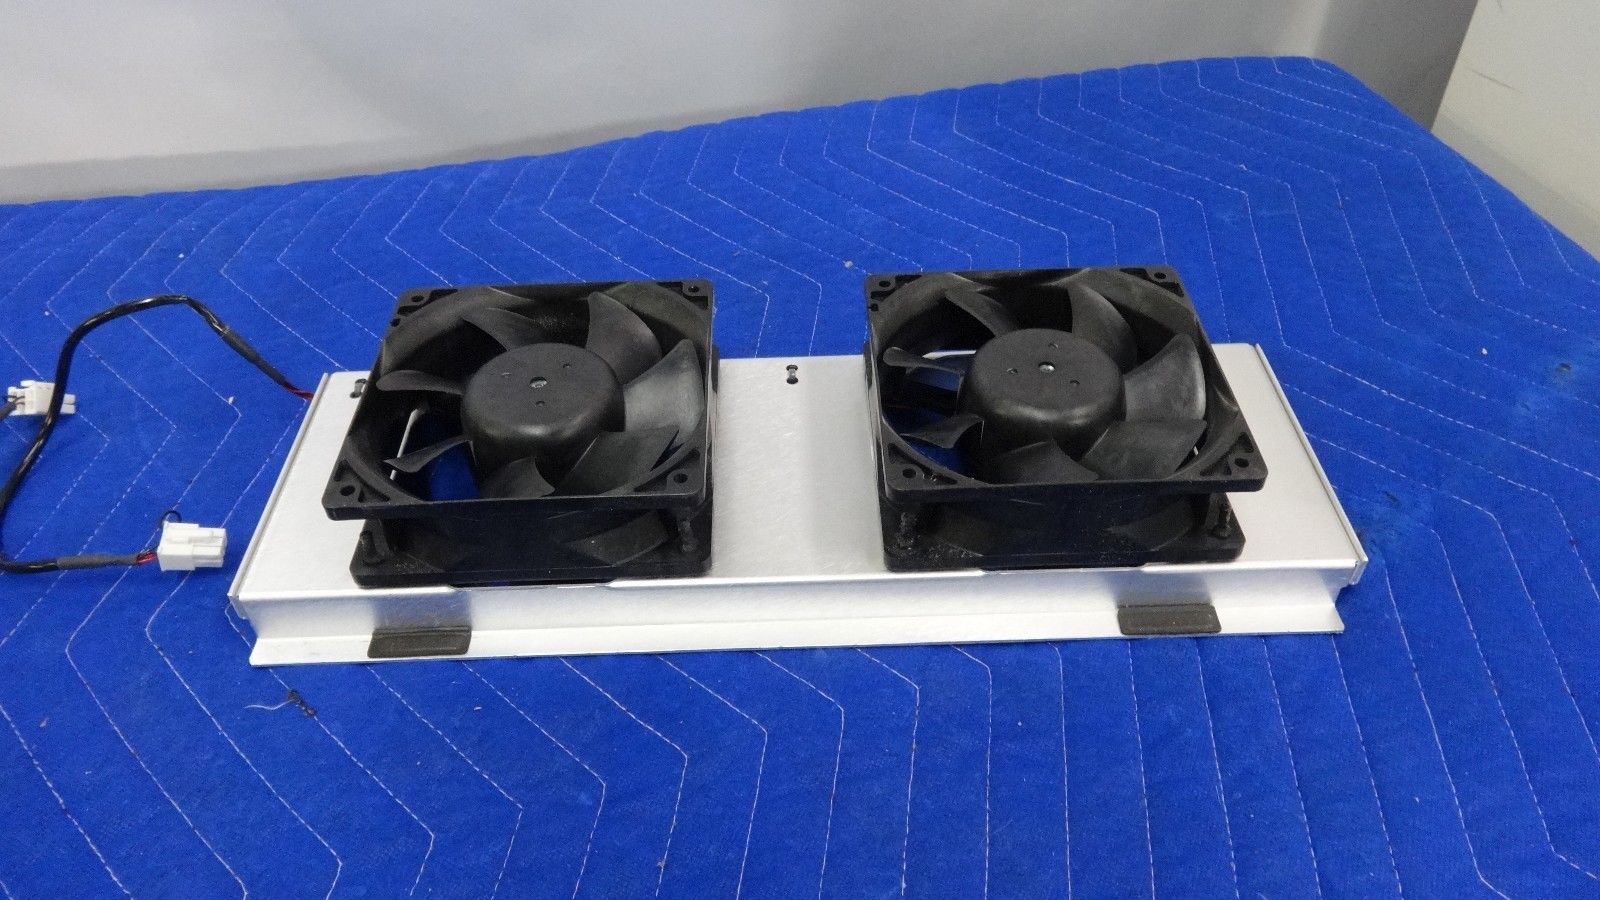 a couple of cooling fans sitting on top of a blue blanket